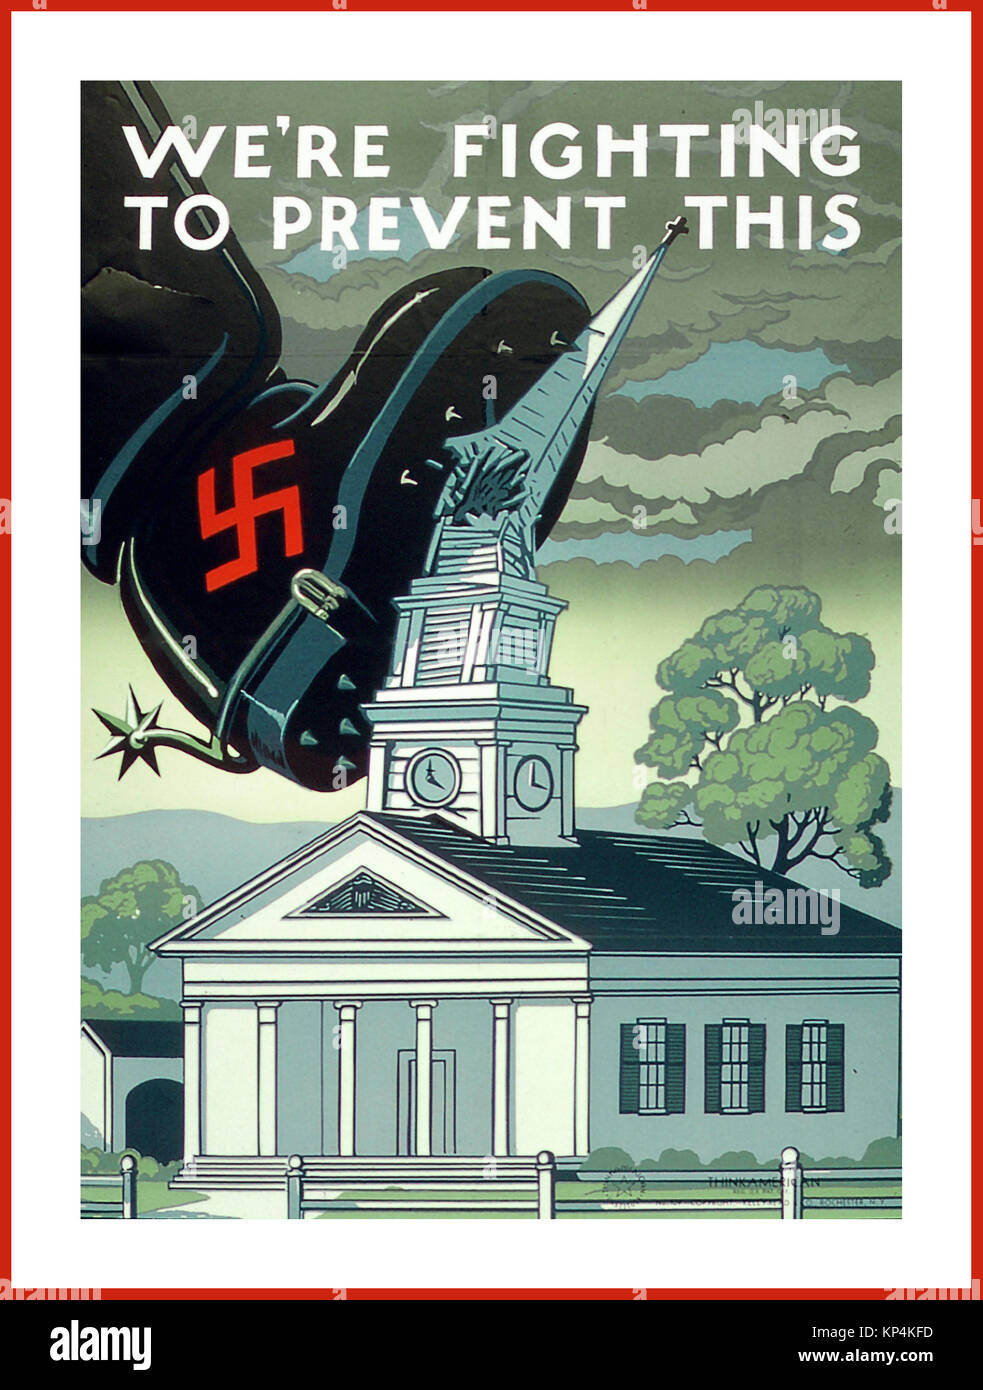 1940's WW2 Vintage American Propaganda Poster 'WE'RE FIGHTING TO PREVENT THIS' During WWII the US government used propaganda about the protection of religious freedoms to further national support for war Stock Photo